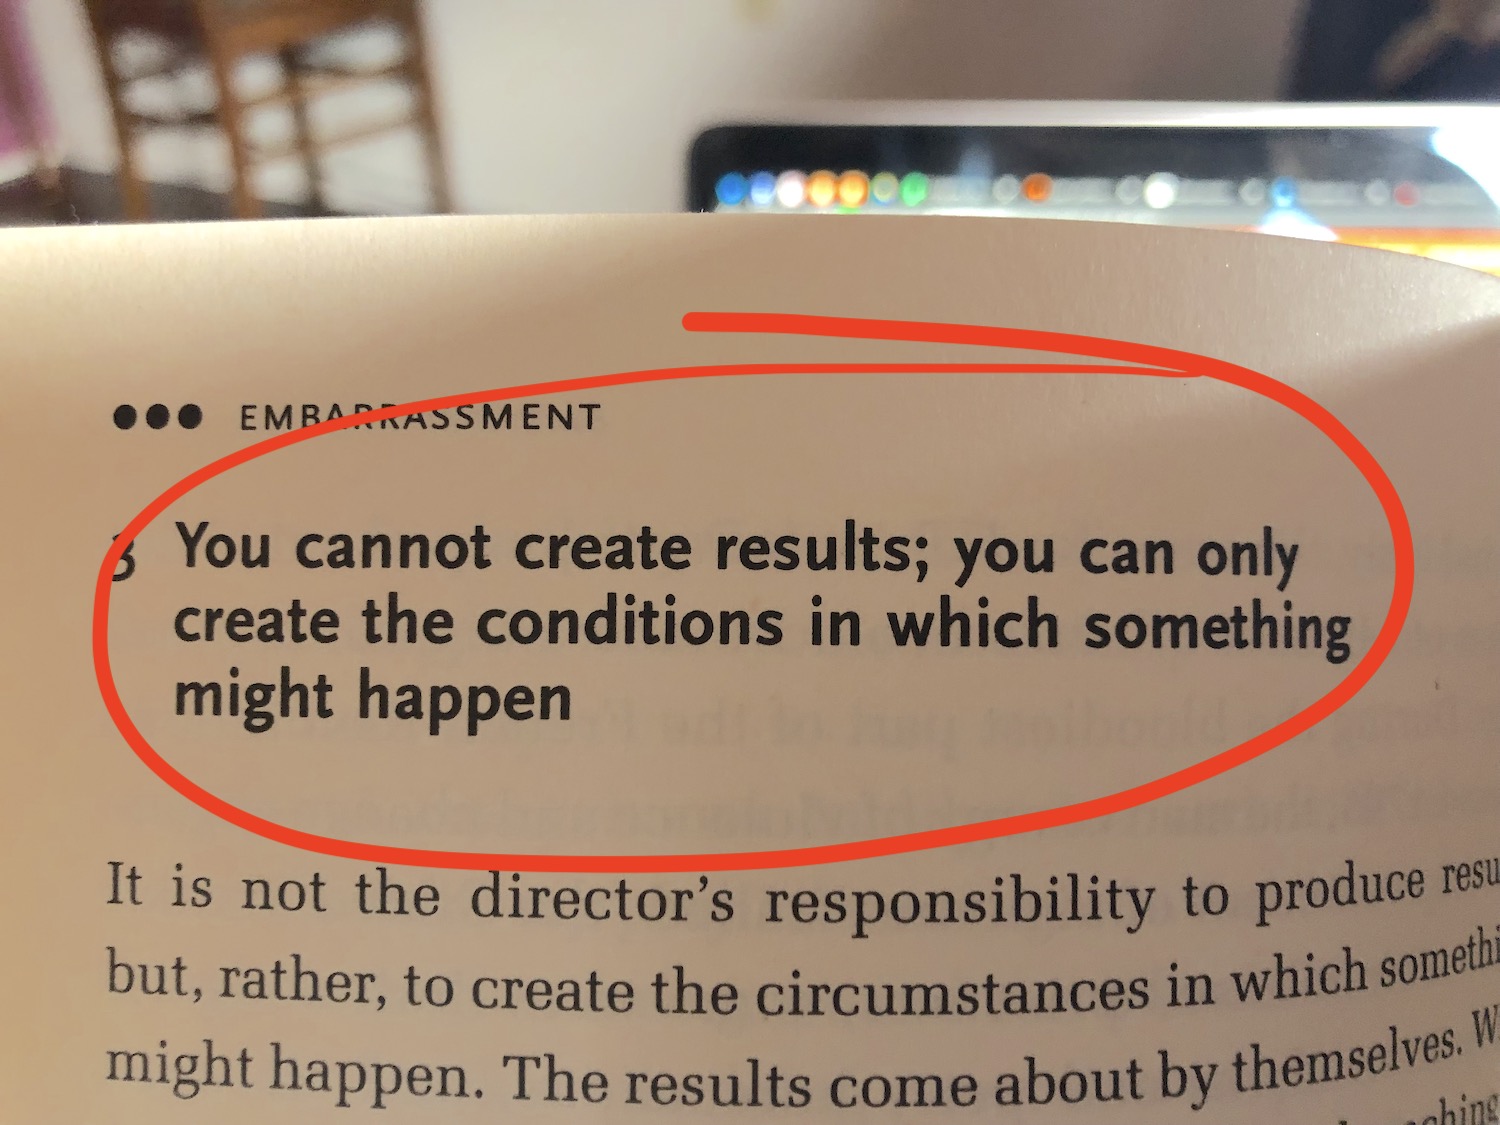 You cannot create results.
You can only create conditions
in which something might happen.
